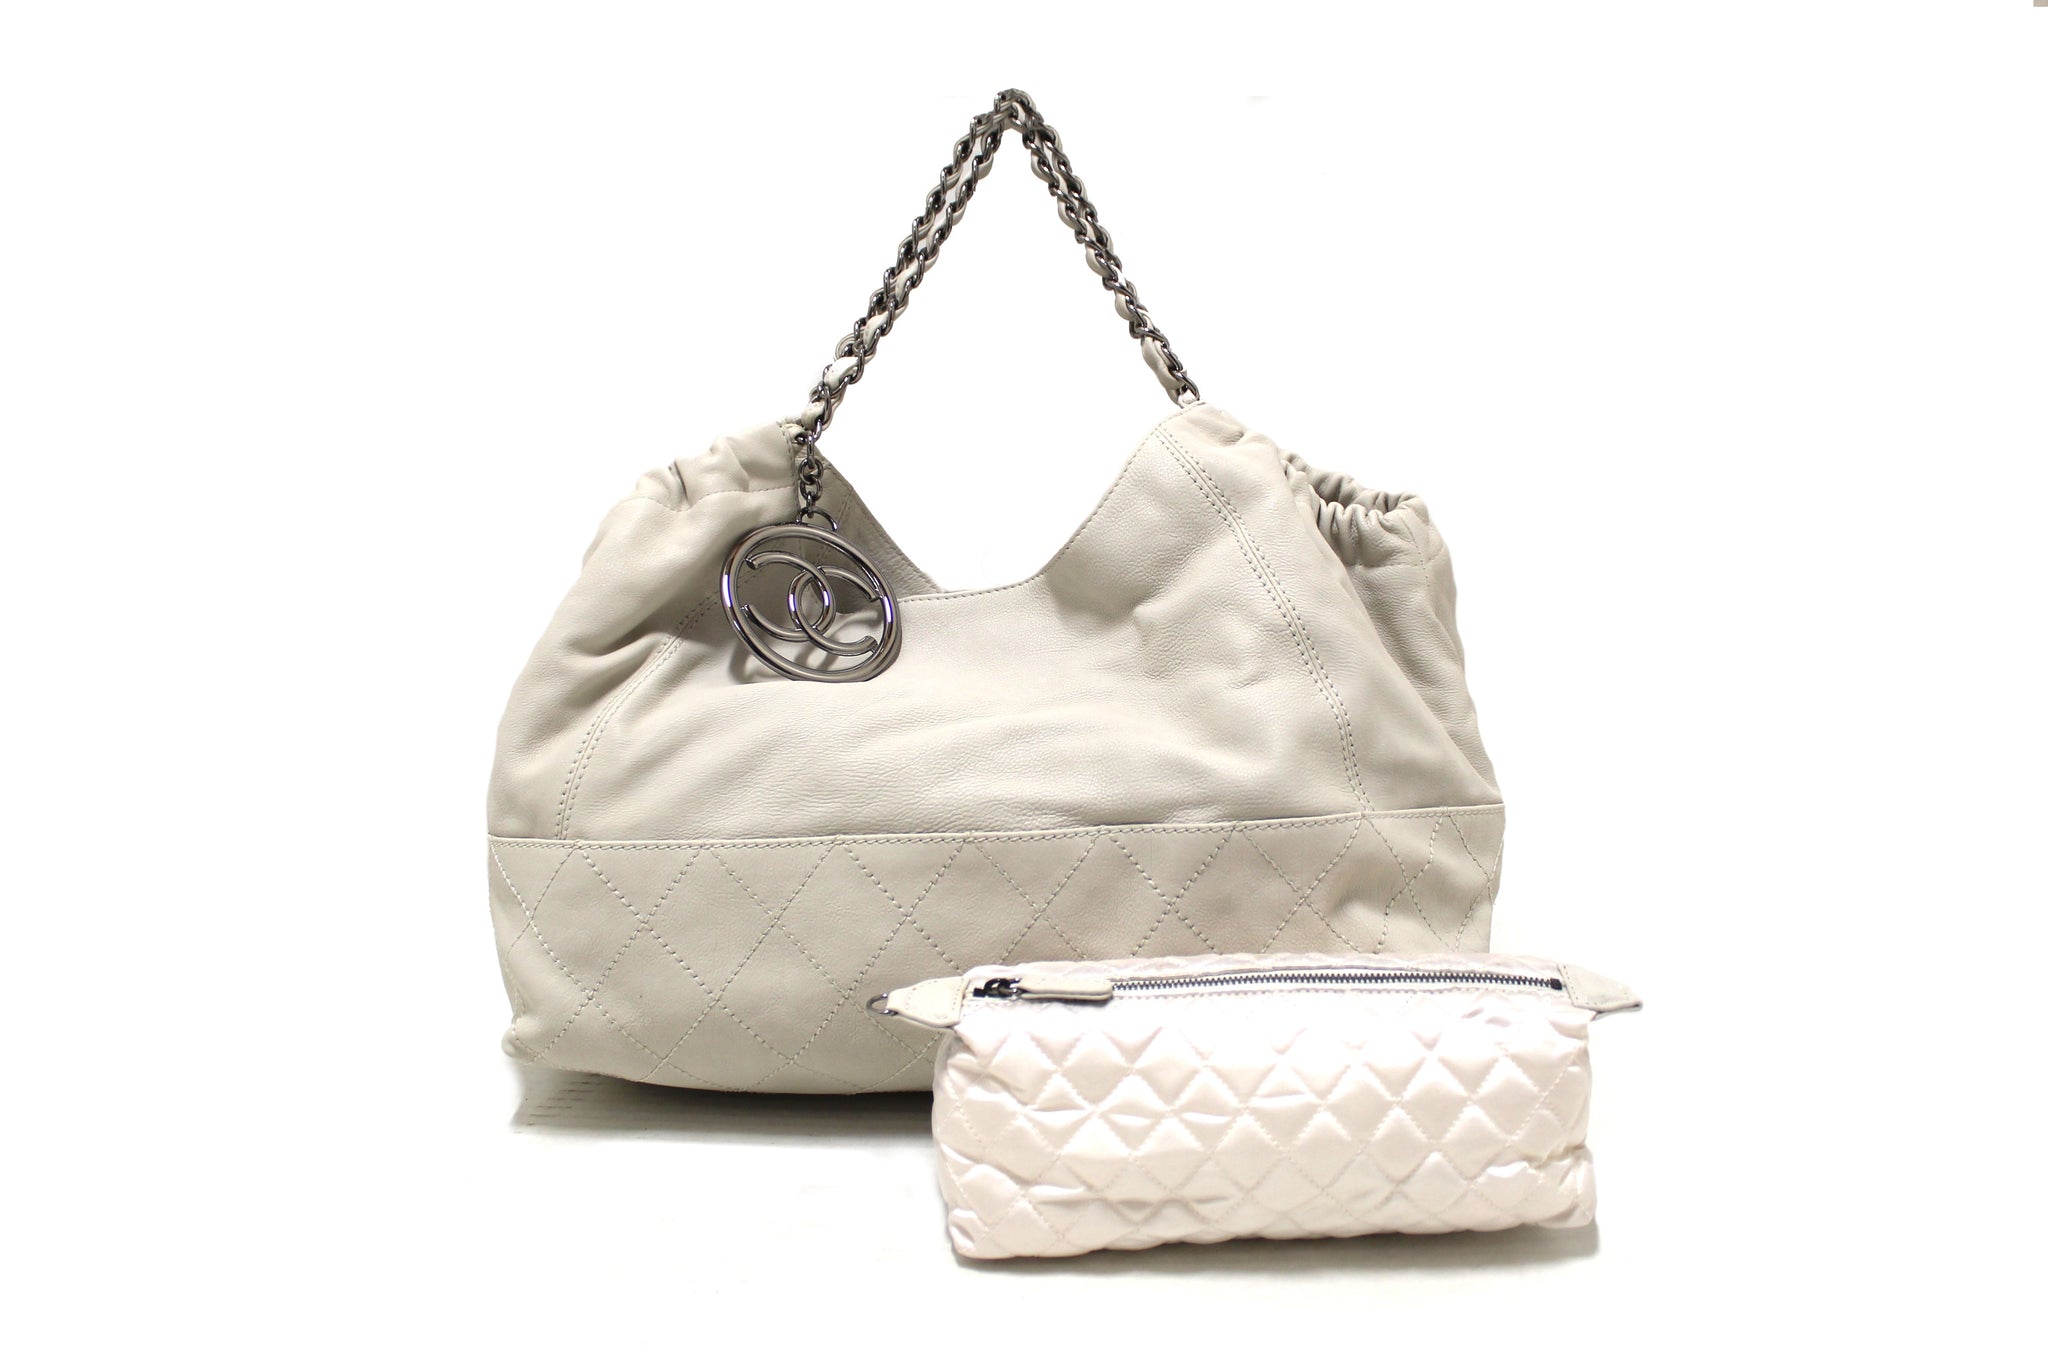 Chanel White Calfskin Leather Coco Cabas Shoulder Tote Bag